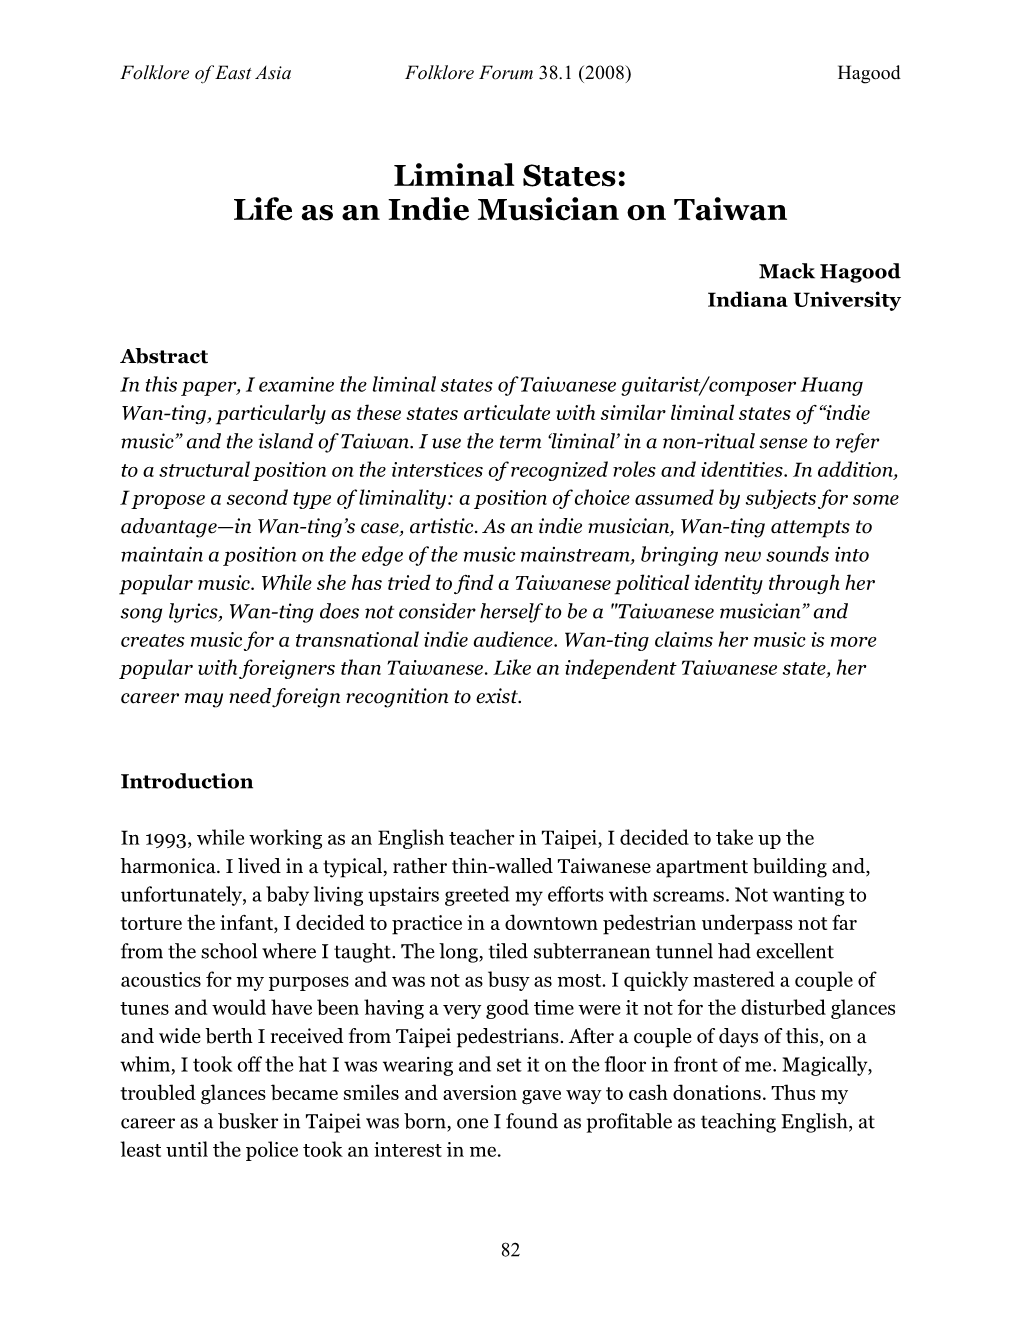 Liminal States: Life As an Indie Musician on Taiwan